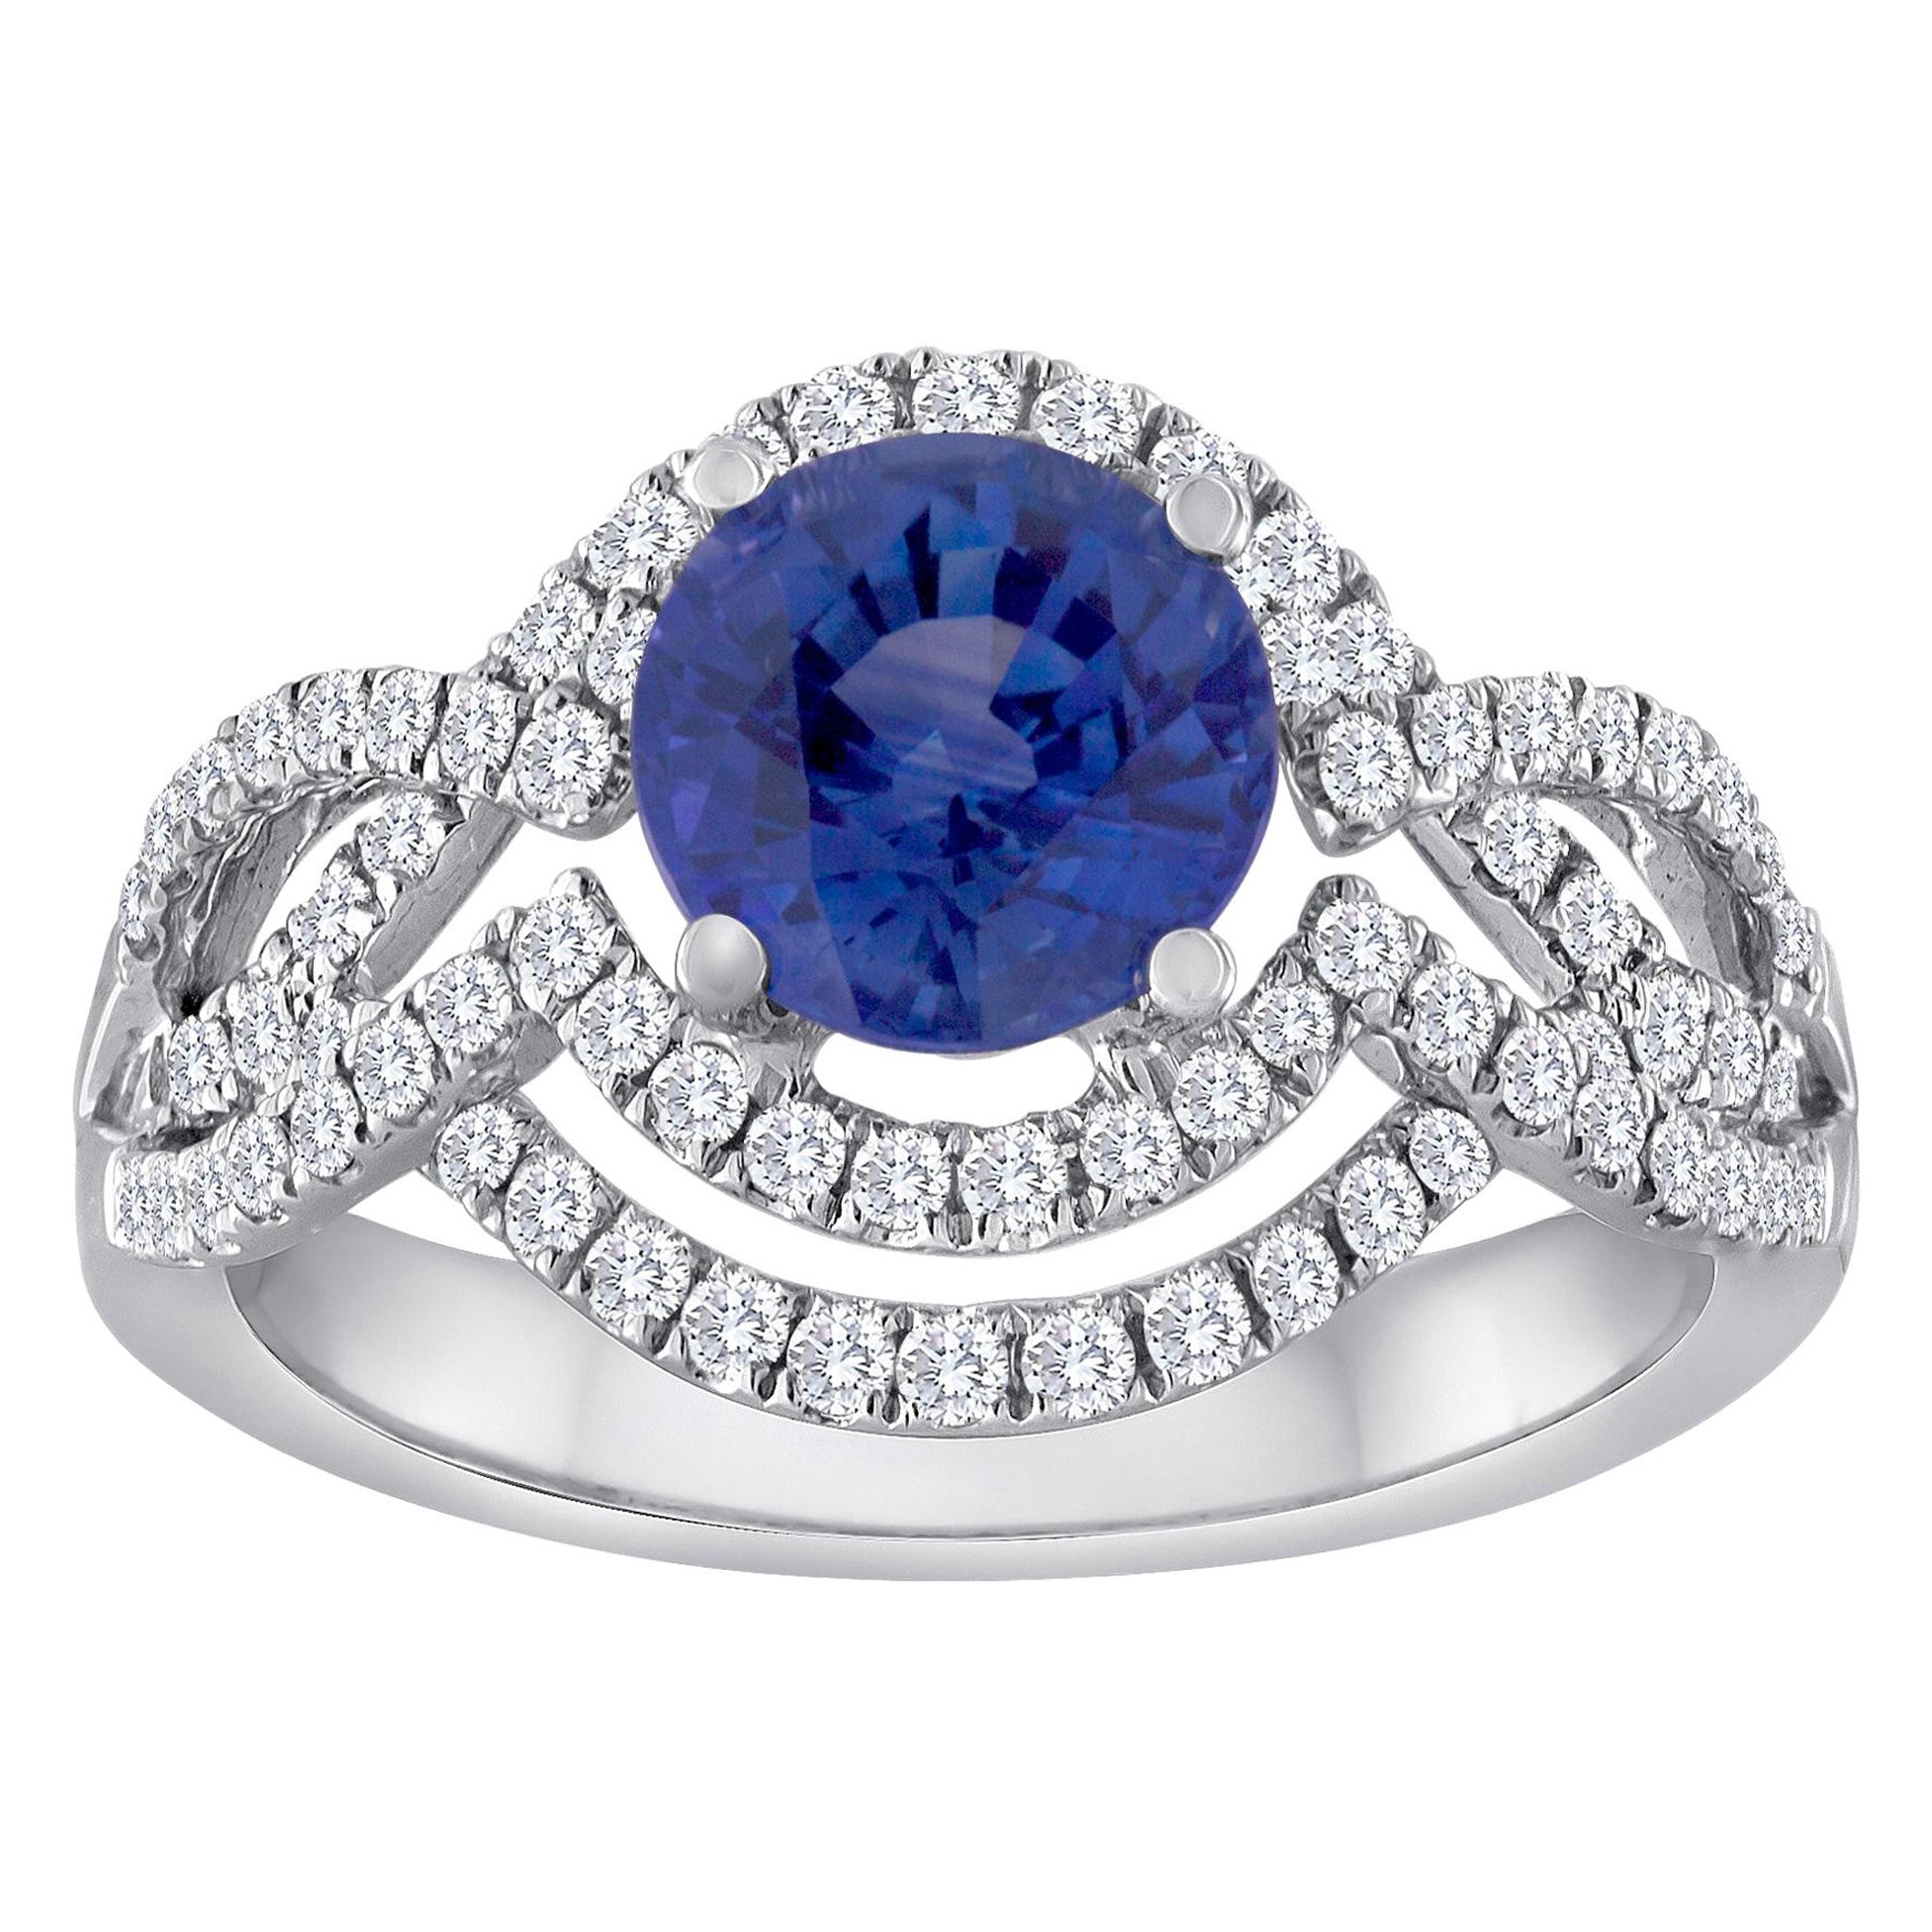 Certified 2.01 Carat Round Blue Sapphire Diamond Double Halo Gold Ring